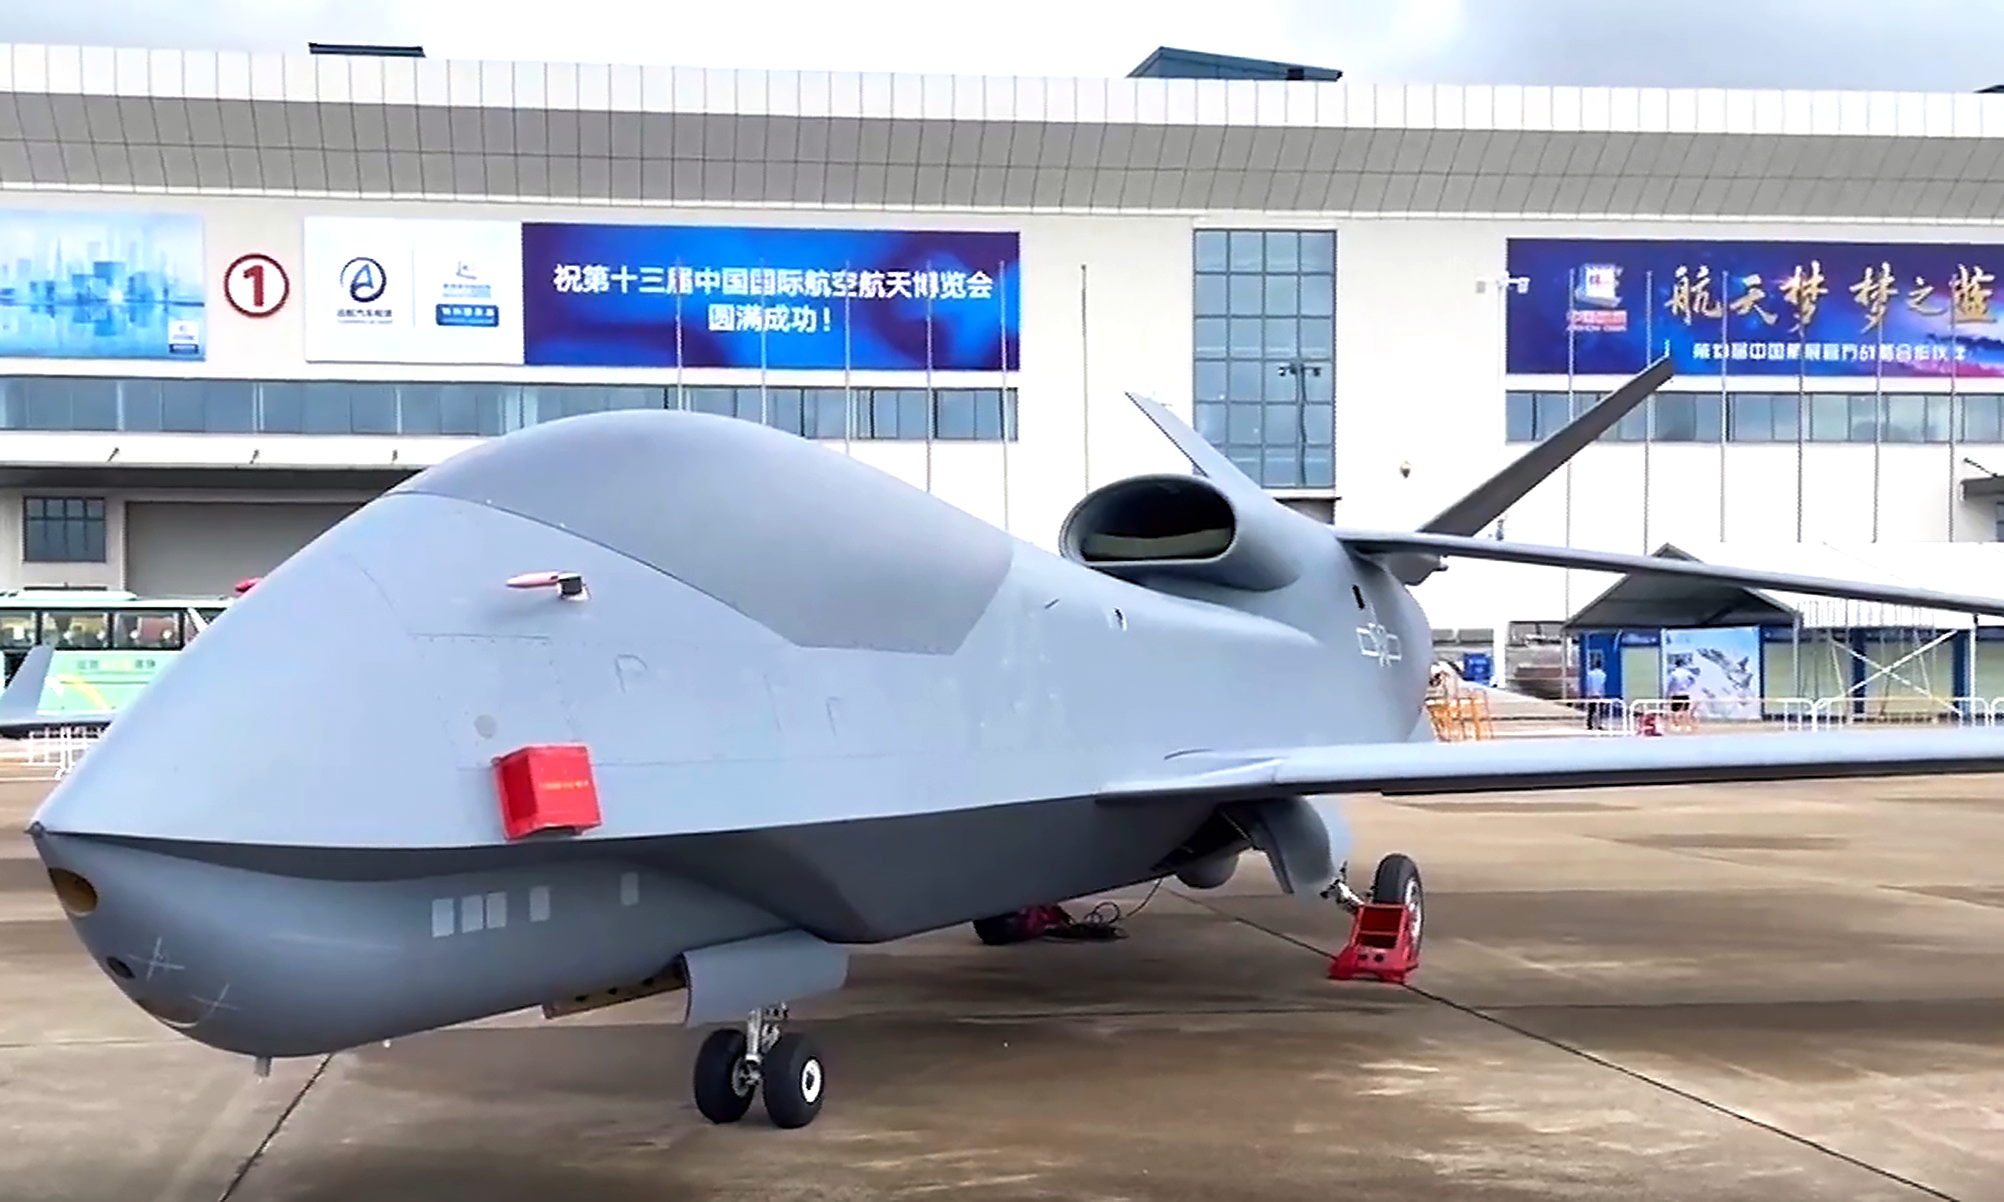 PLA Air Force to unveil WZ-7 high-altitude reconnaissance drone at Airshow China in Zhuhai